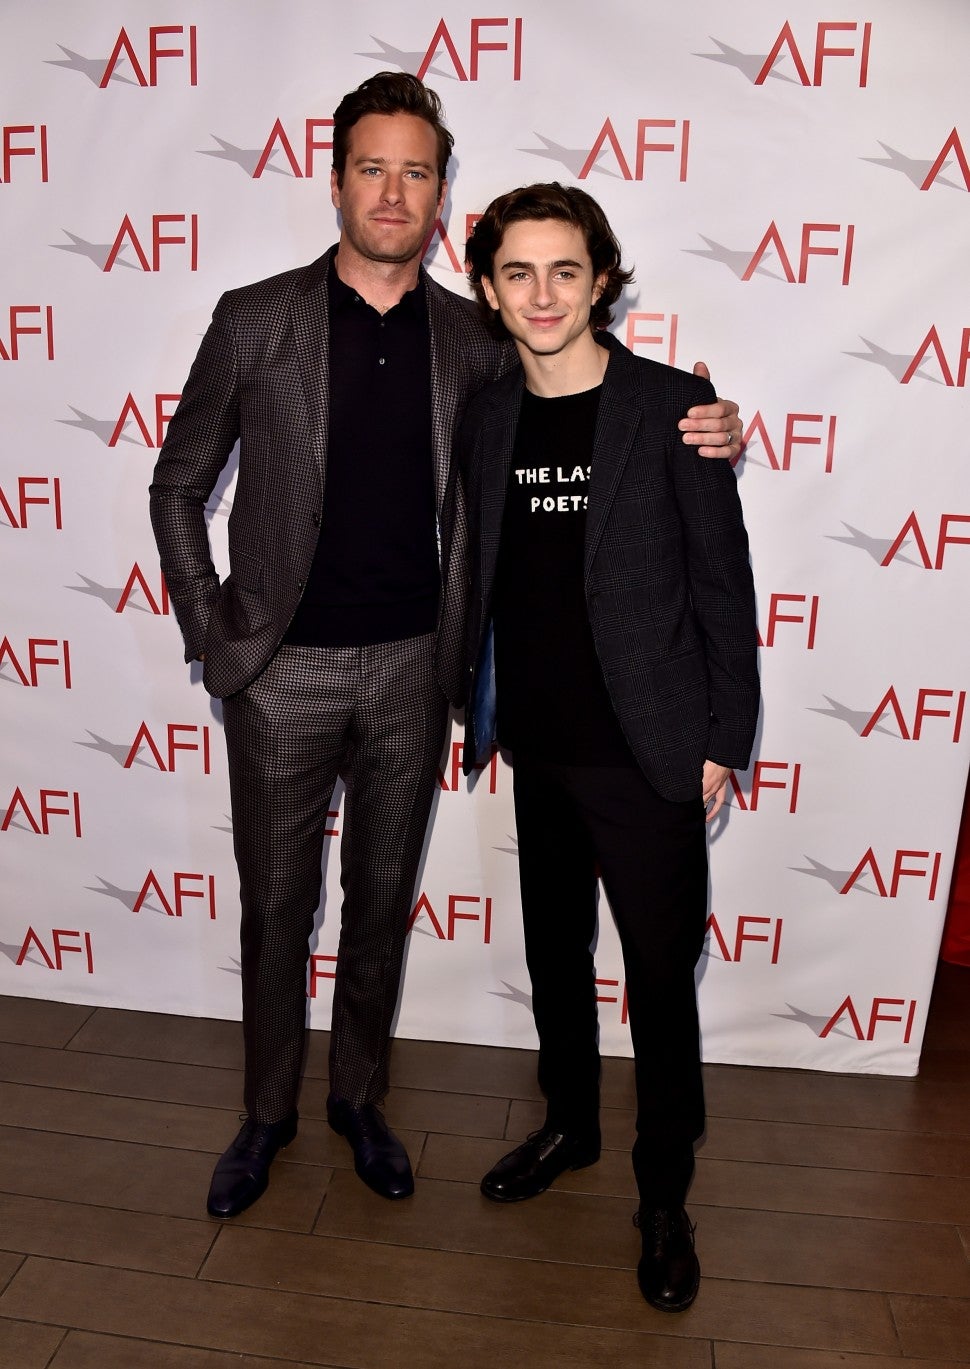 Armie Hammer and Timothee Chalamet AFI Awards